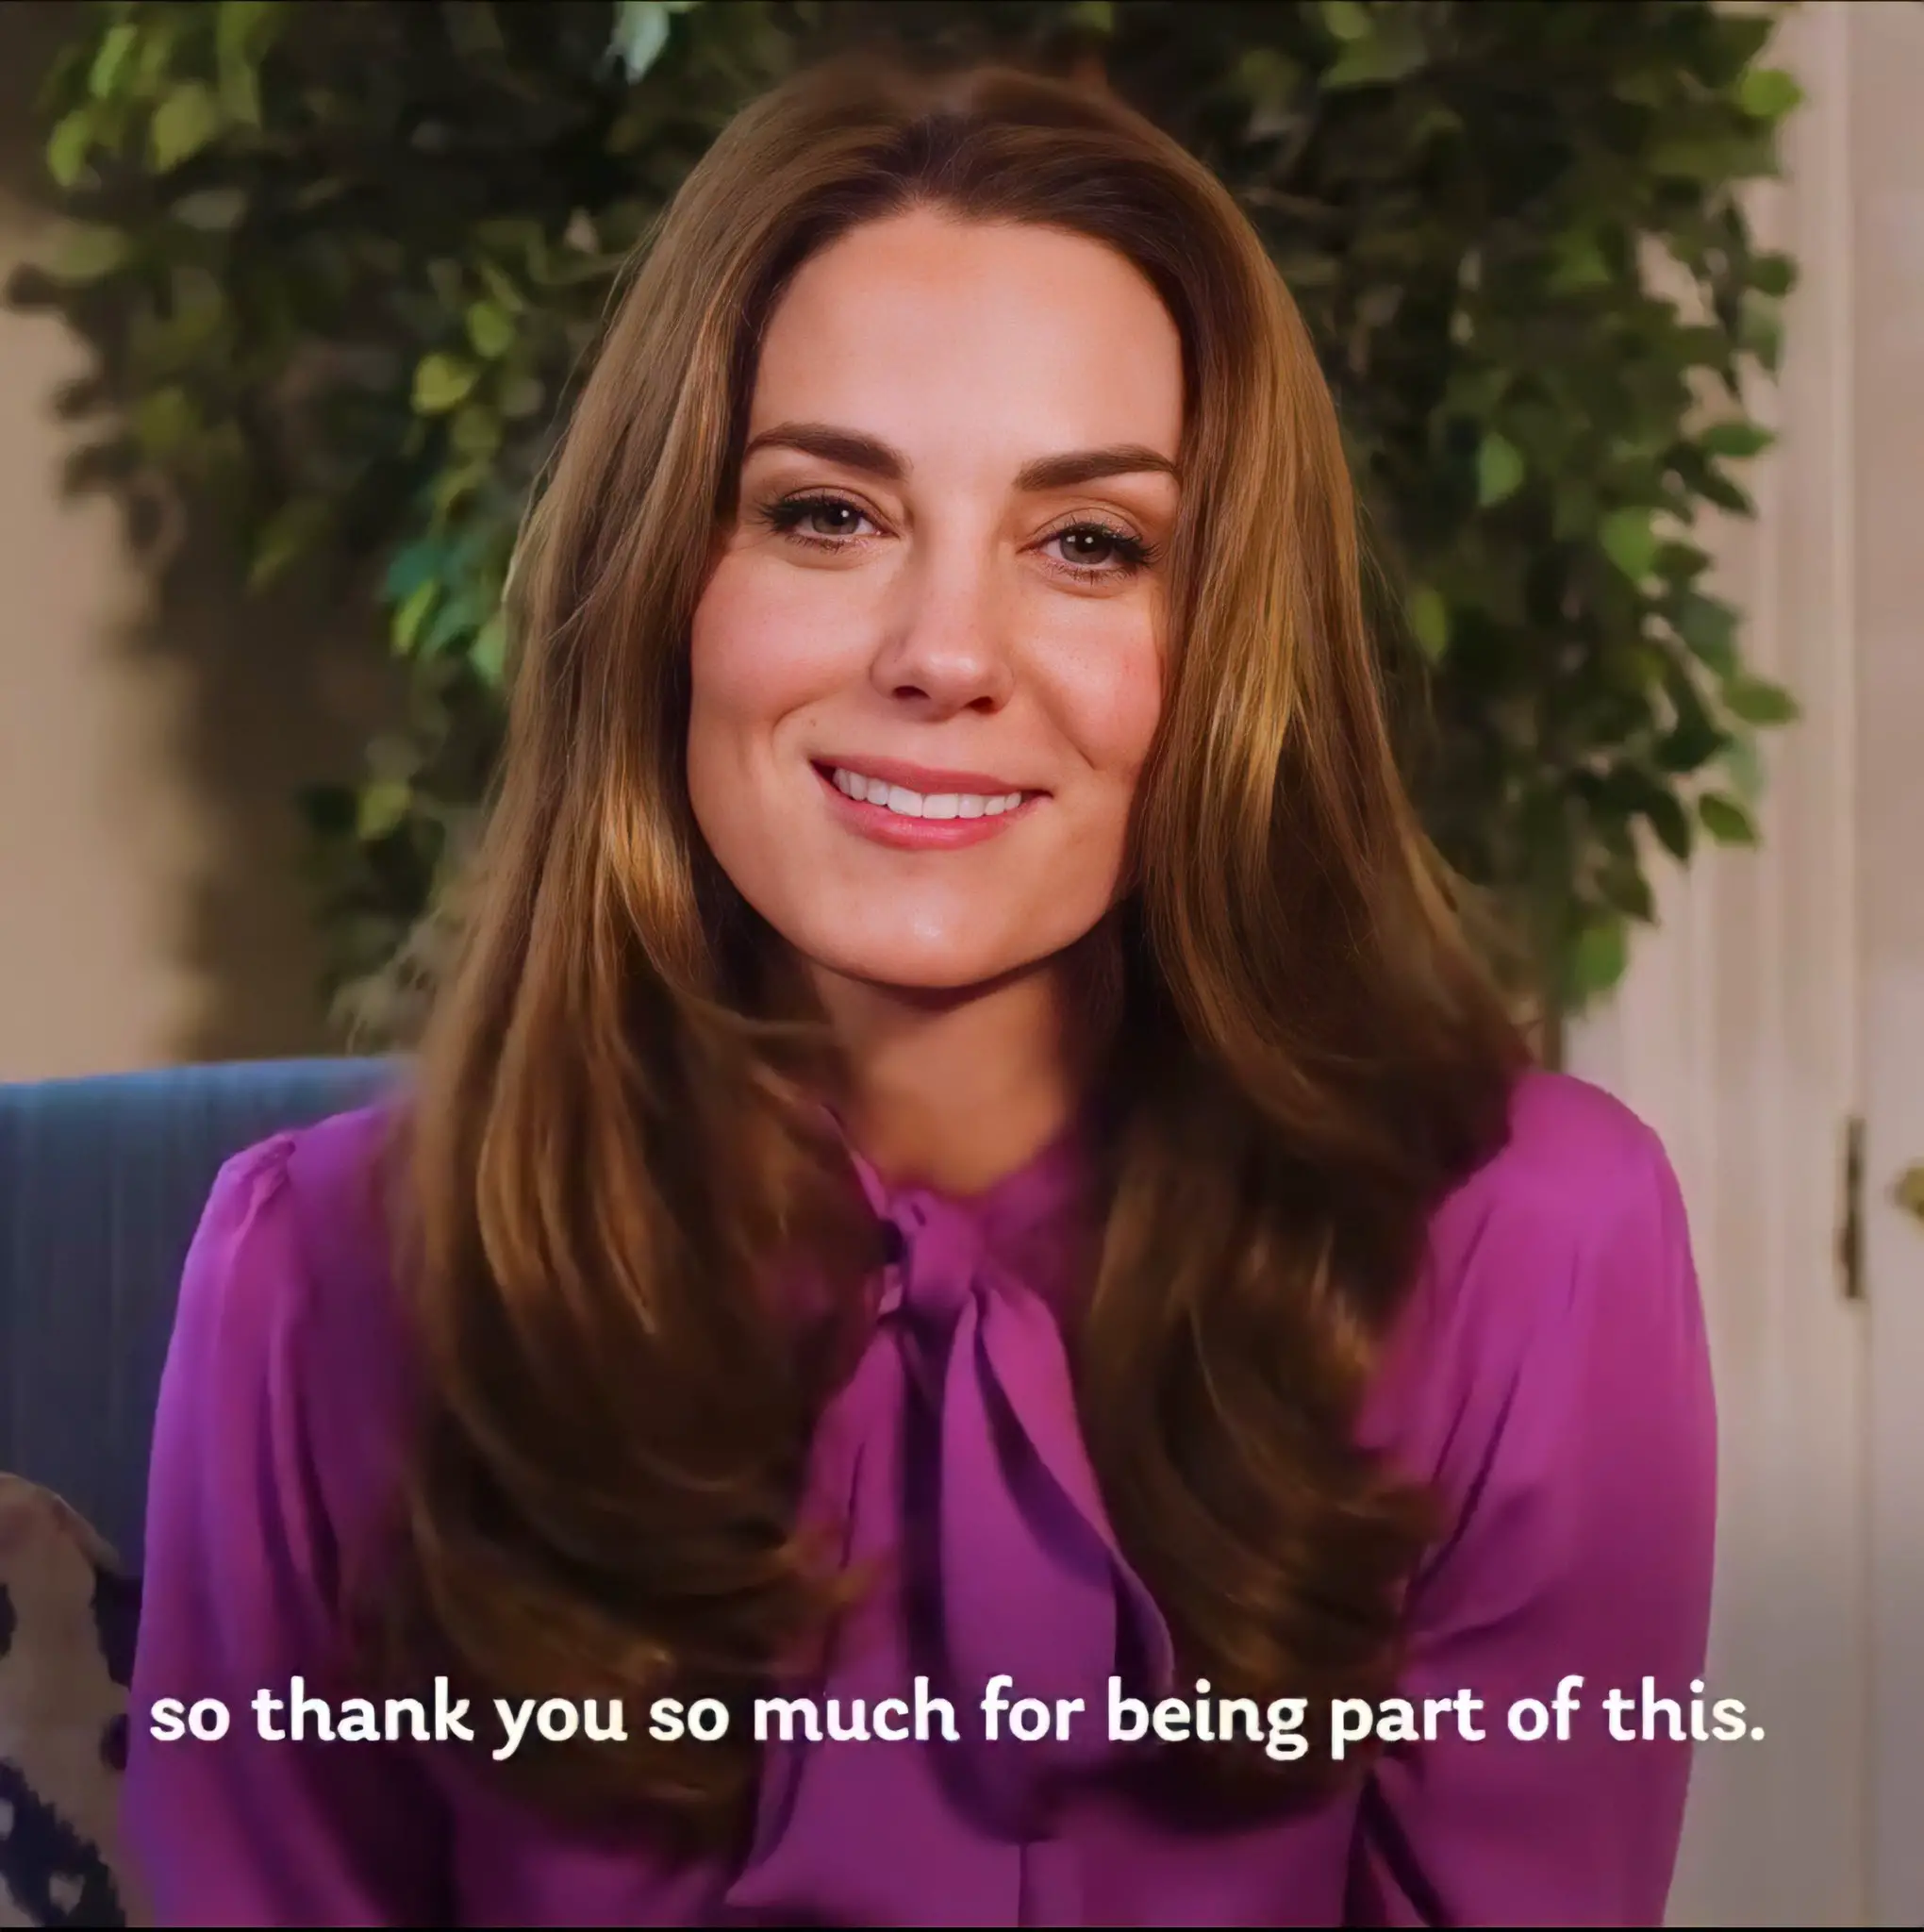 The Duchess of Cambridge had a candid early years Q&A session